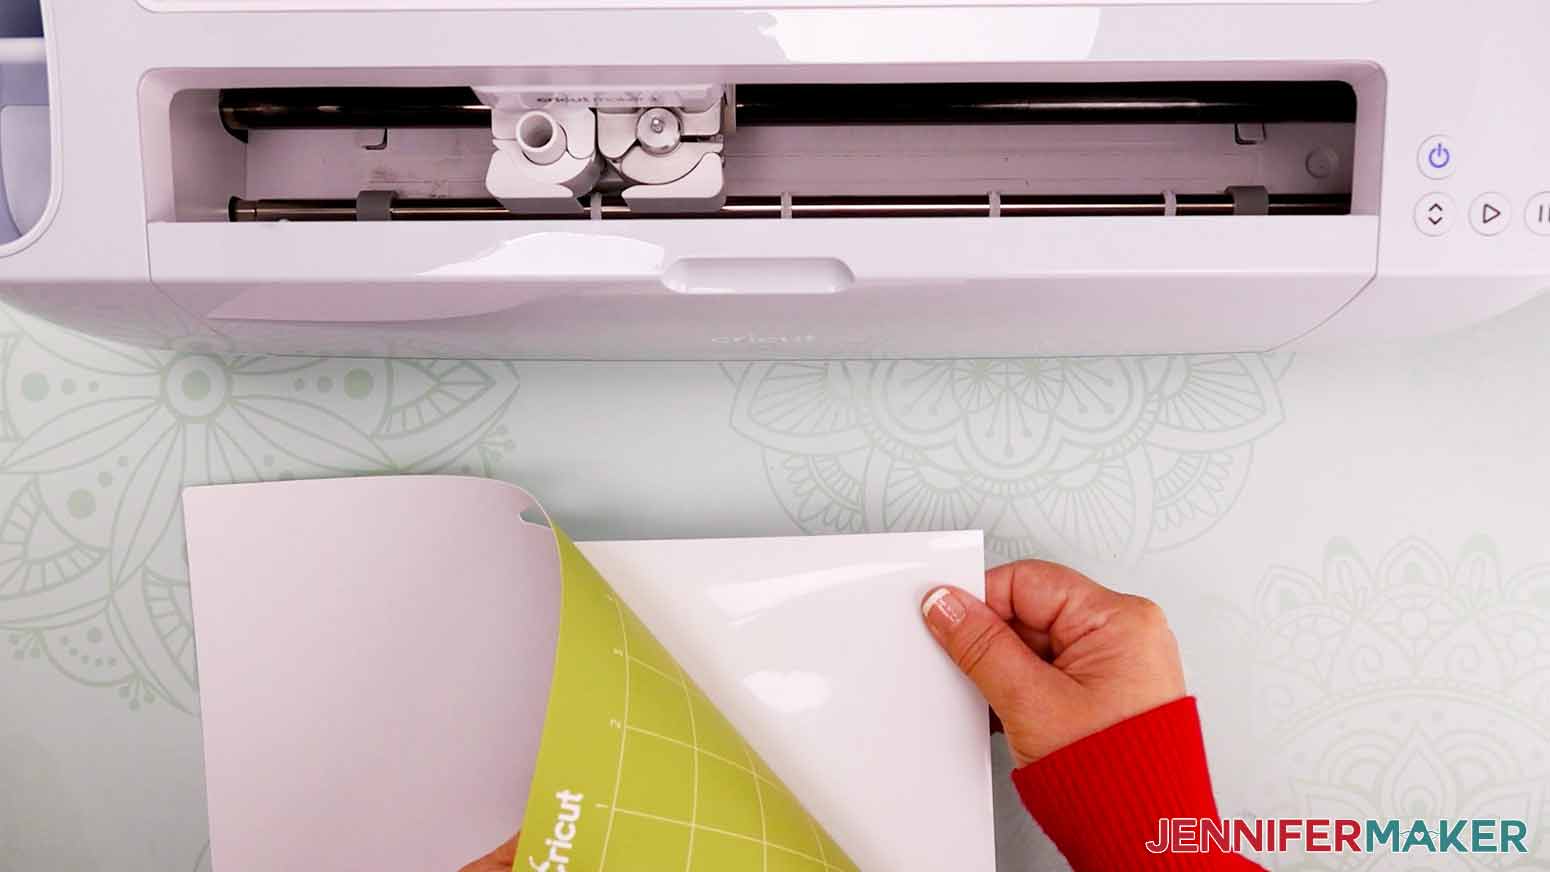 Flip the cutting mat over and peel it away from the vinyl to prevent curling.